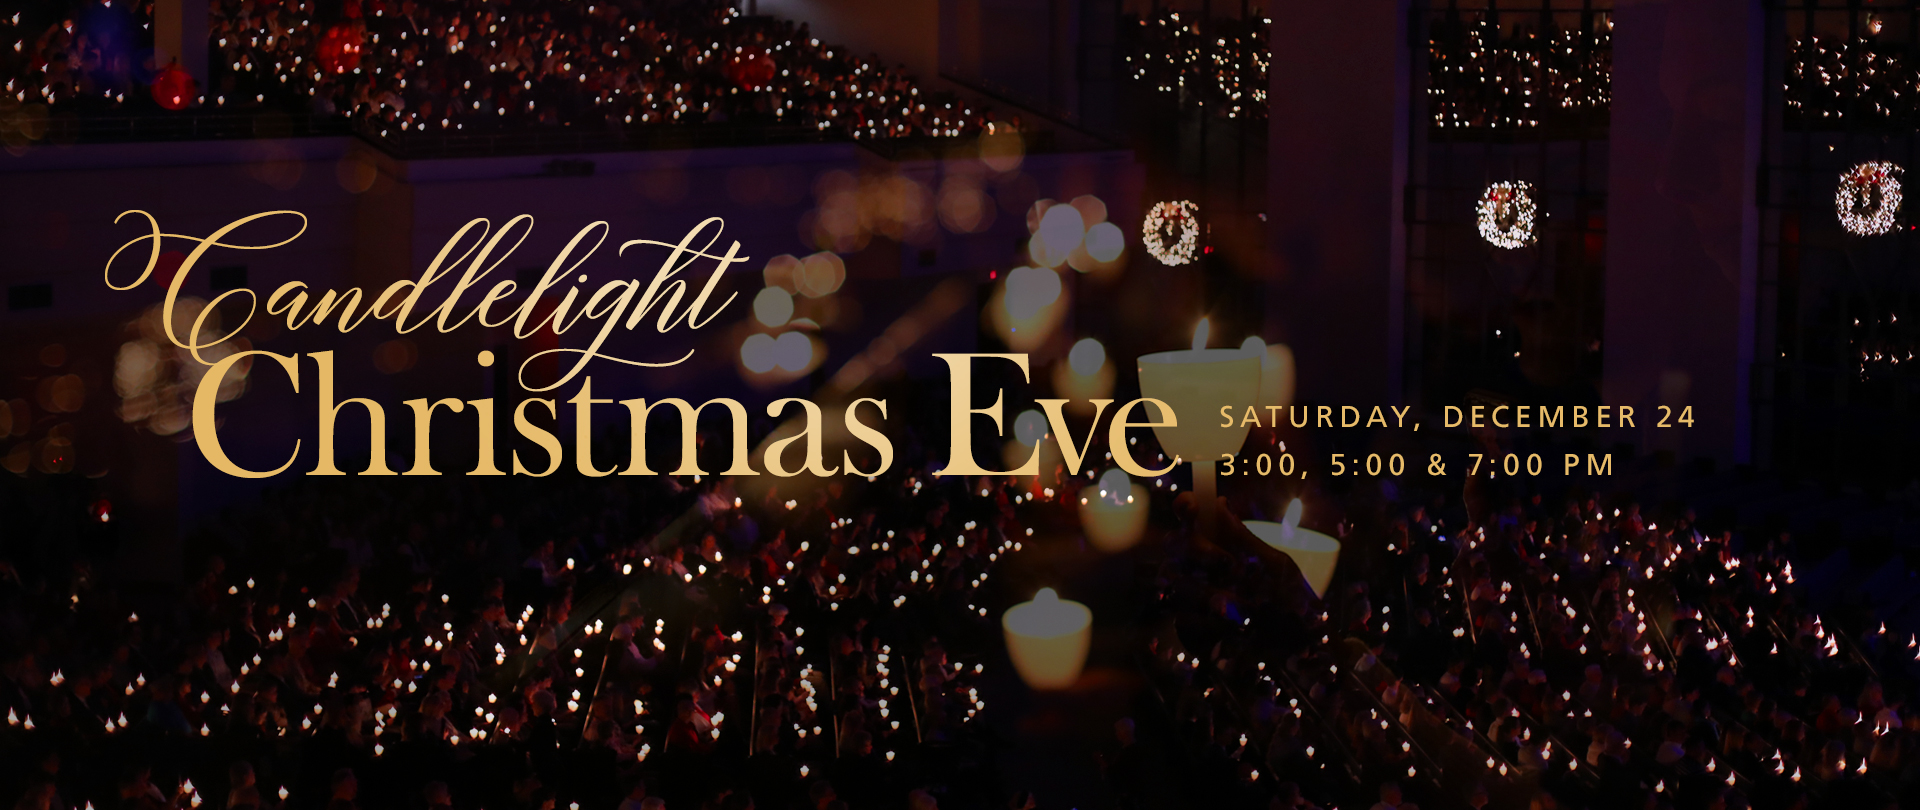 Candlelight Christmas Eve
"The Magnificent Christ"
Saturday, December 24
3:00, 5:00 & 7:00 PM
